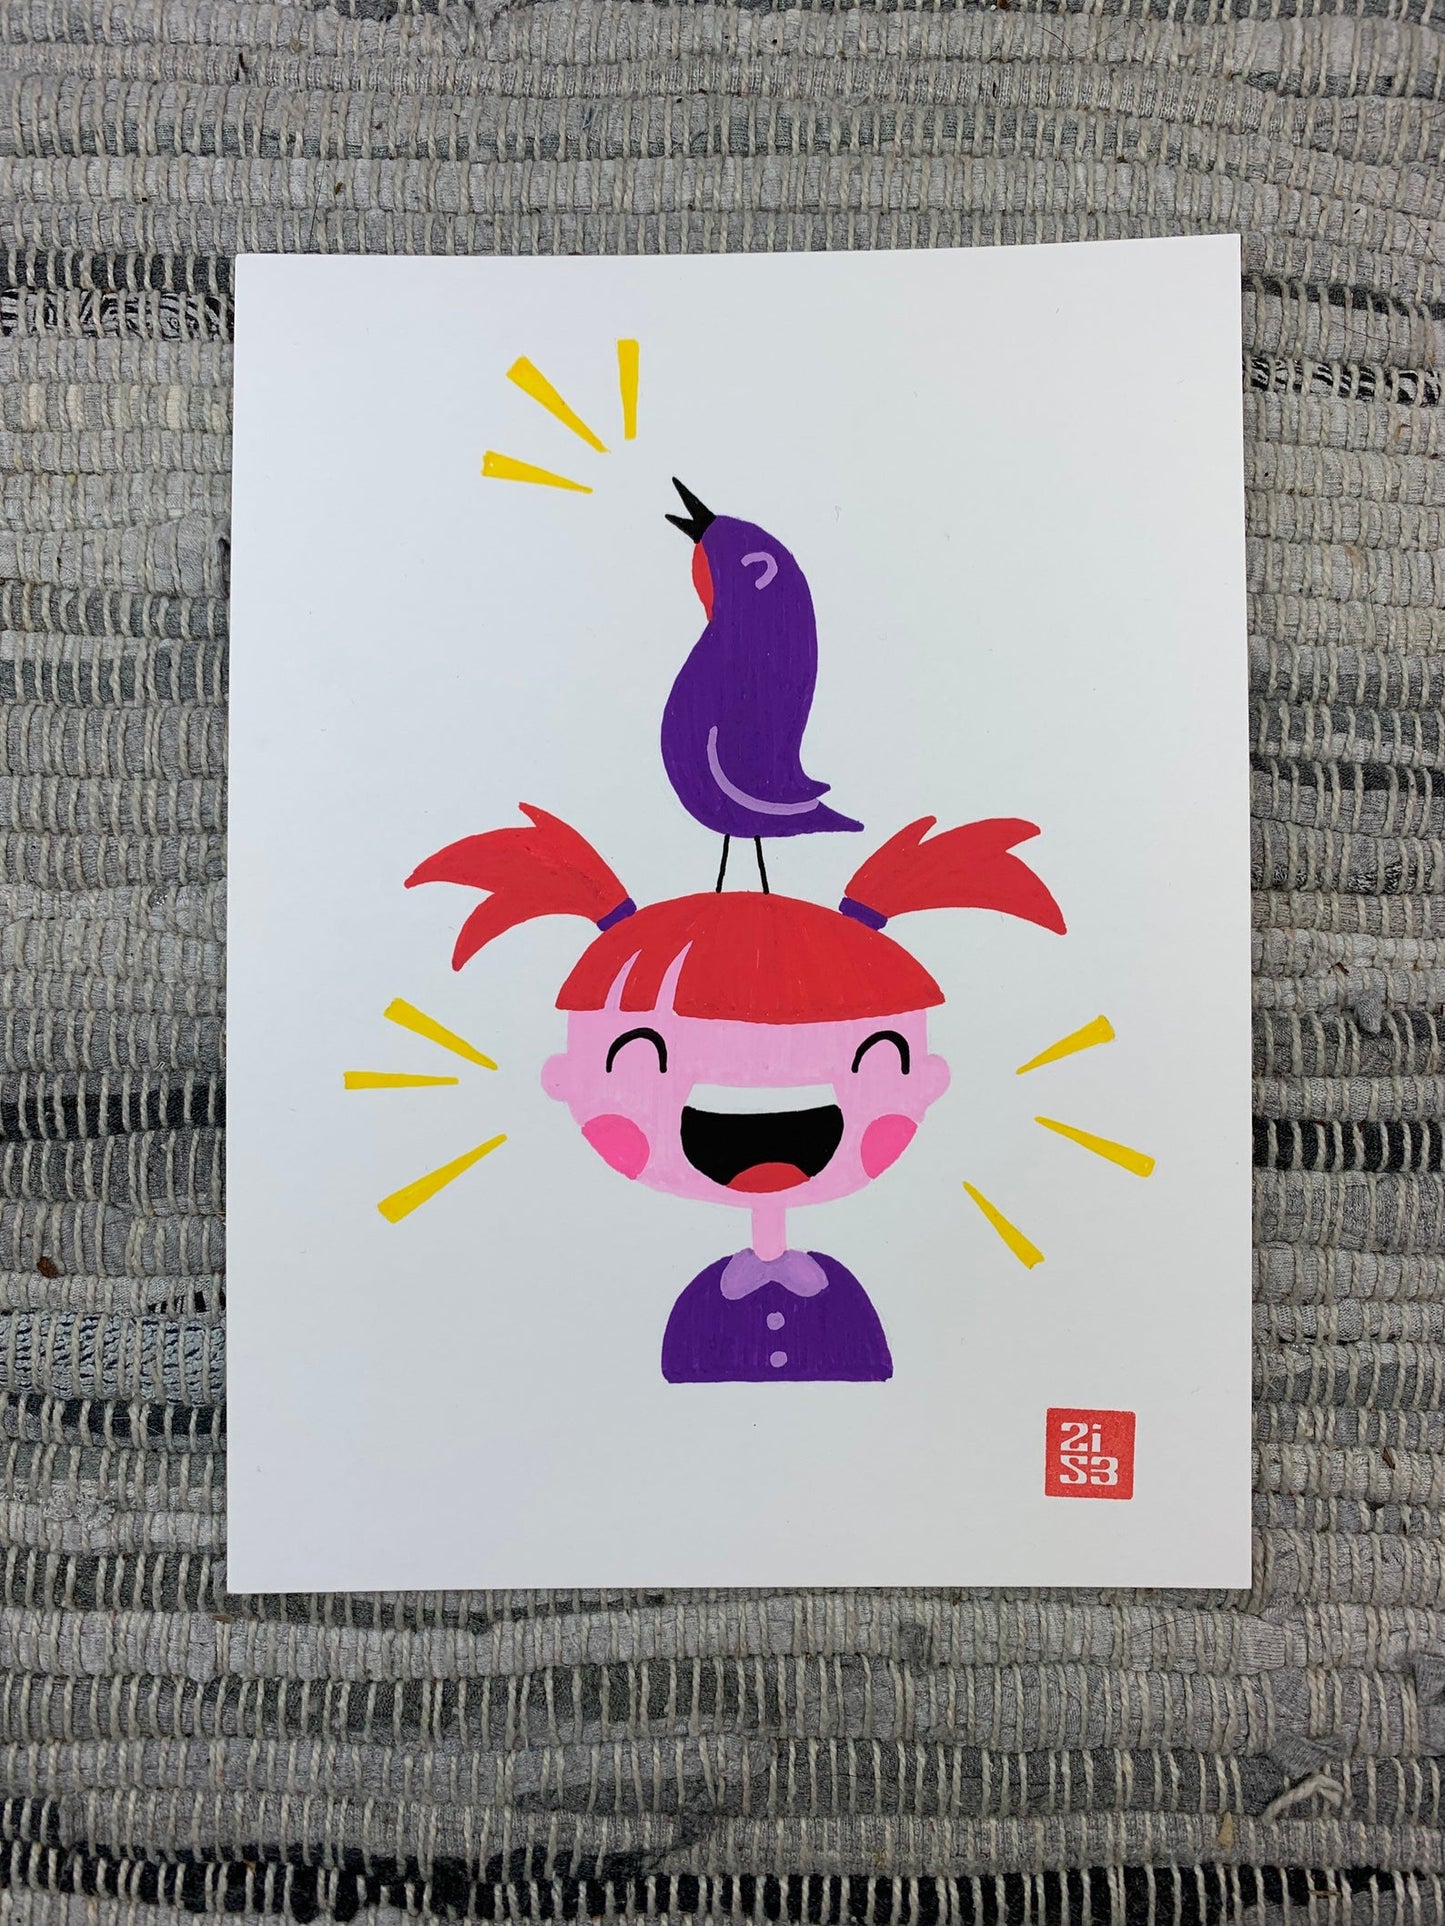 Original artwork of a little girl laughing loudly while a chachalaca bird stands on her head and chatters too.